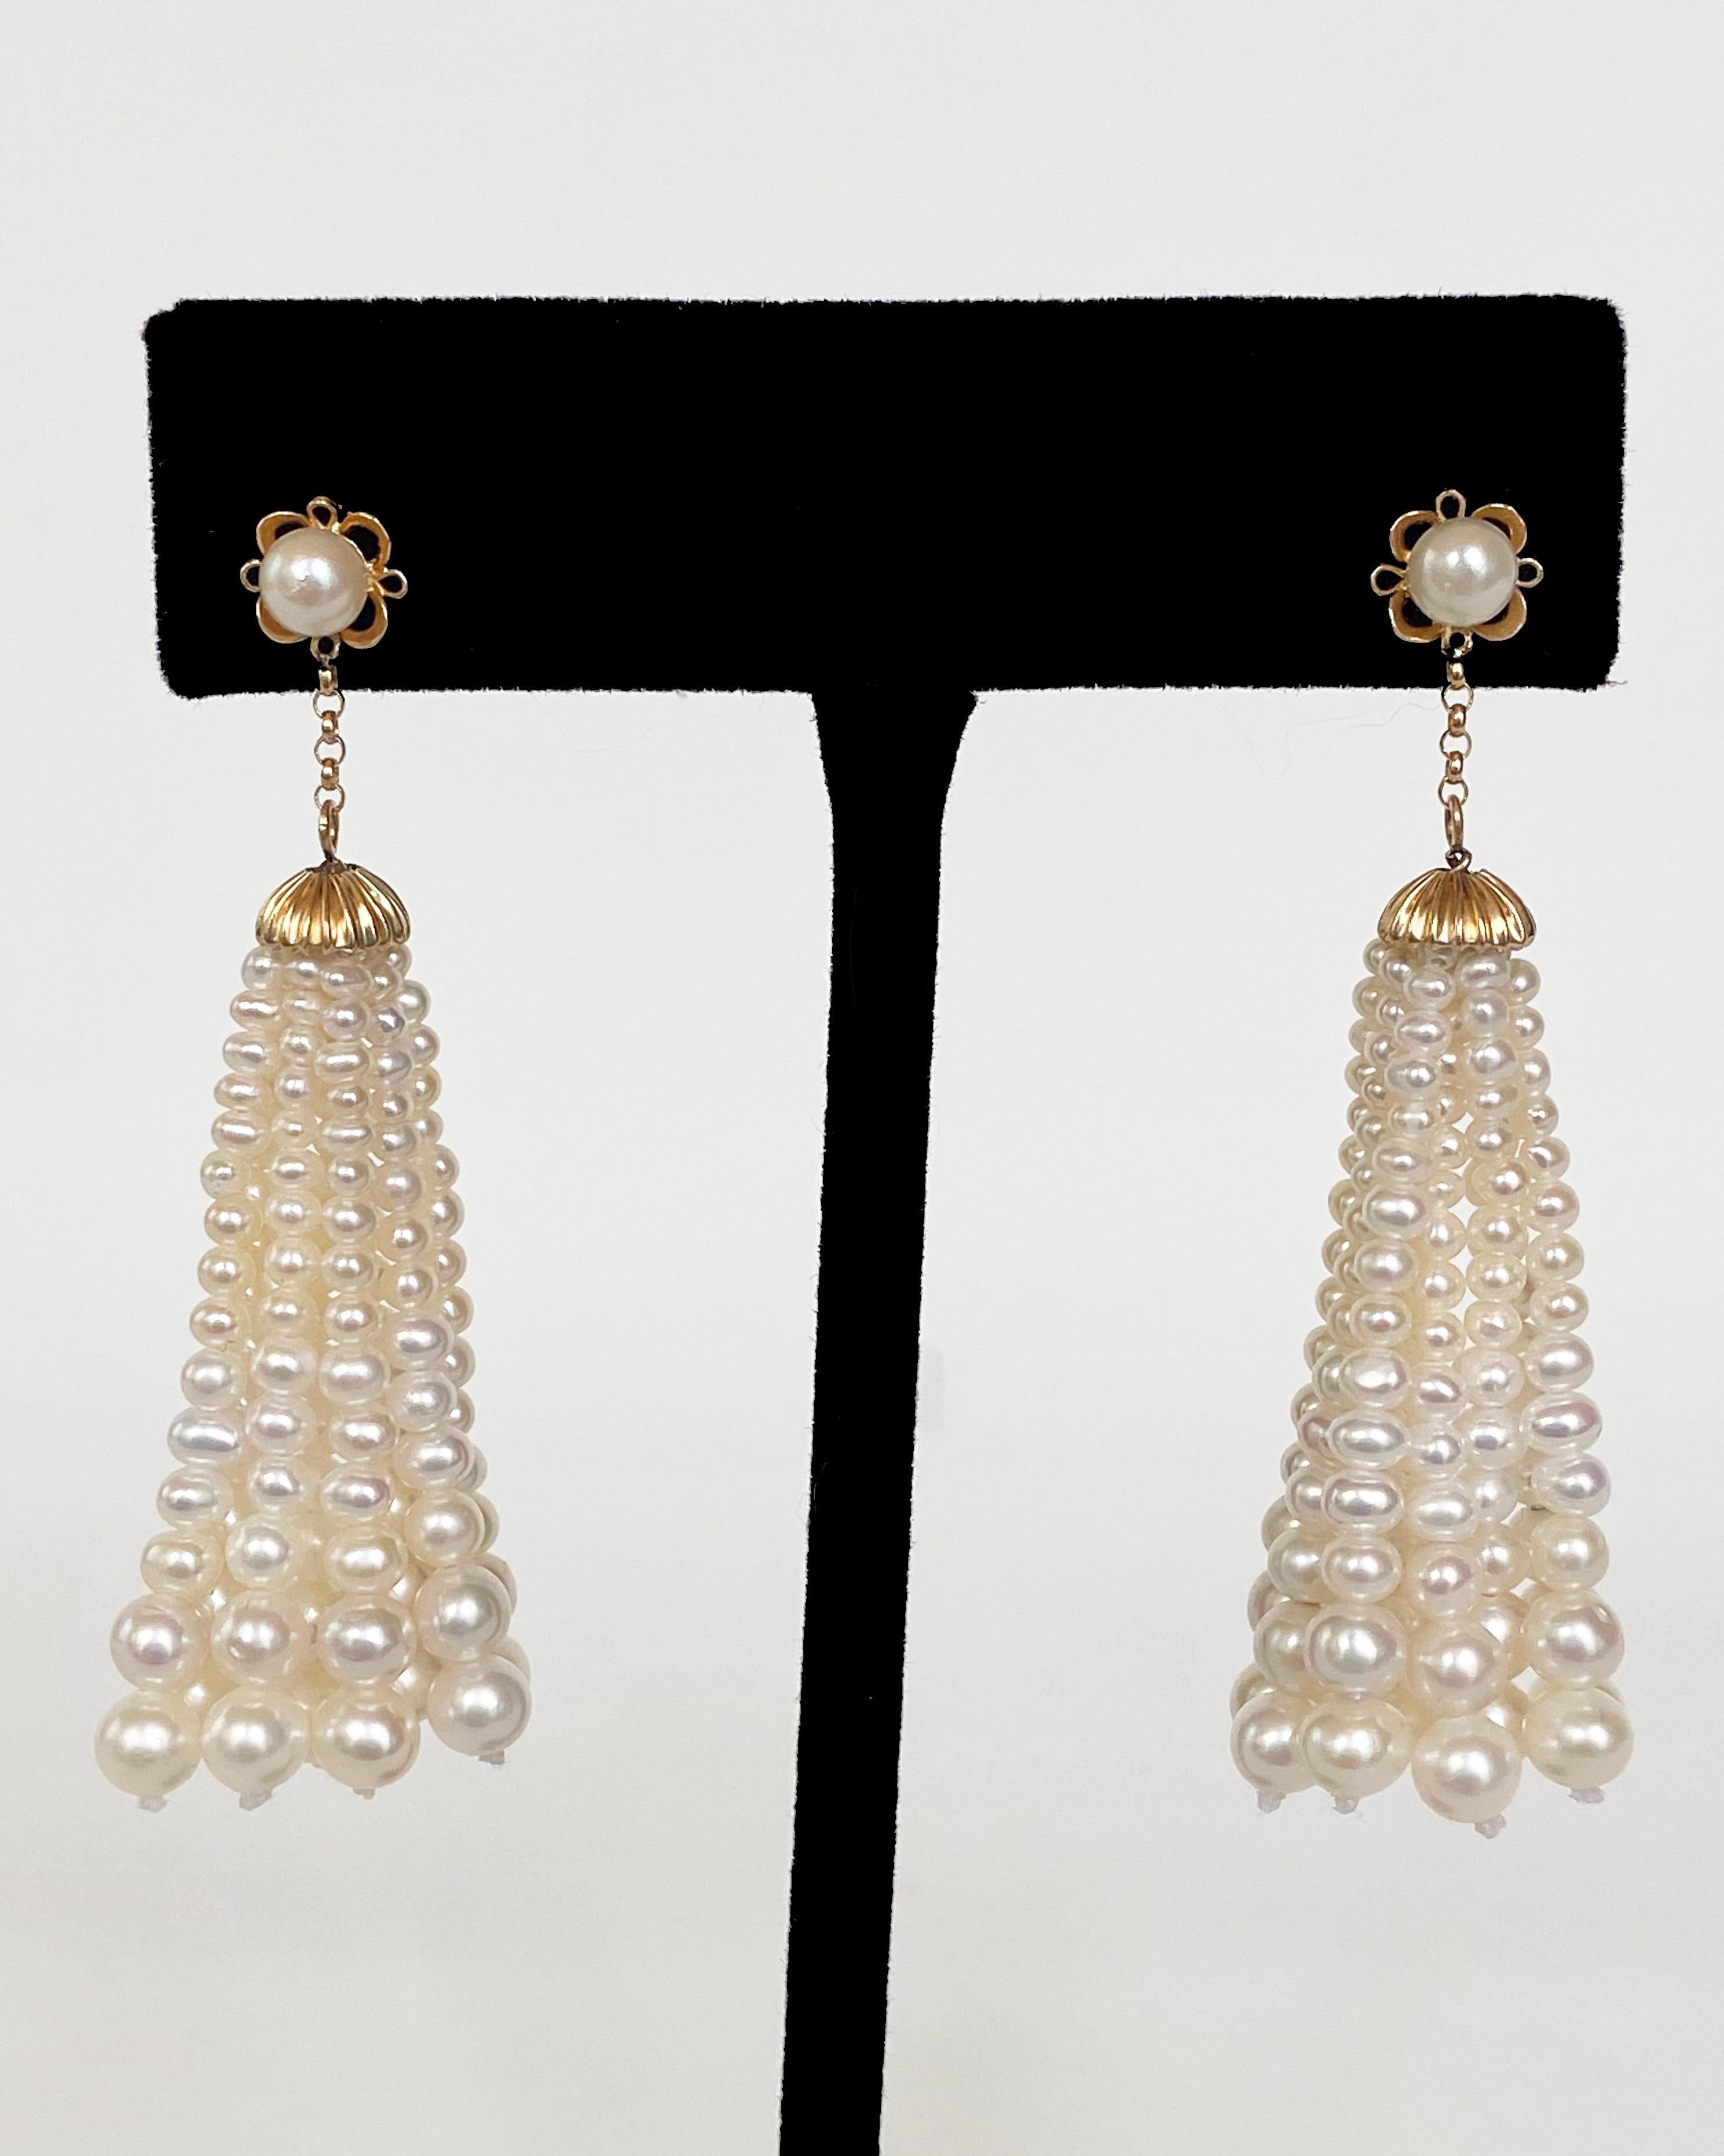 Light yet bold pair of Earrings by Marina J. This elegant pair features a Pearl embedded solid 14k Yellow Gold Flower, with a studded back. A short solid 14k Yellow Gold chain hangs underneath the Floral design, from which a solid 14k Yellow Gold